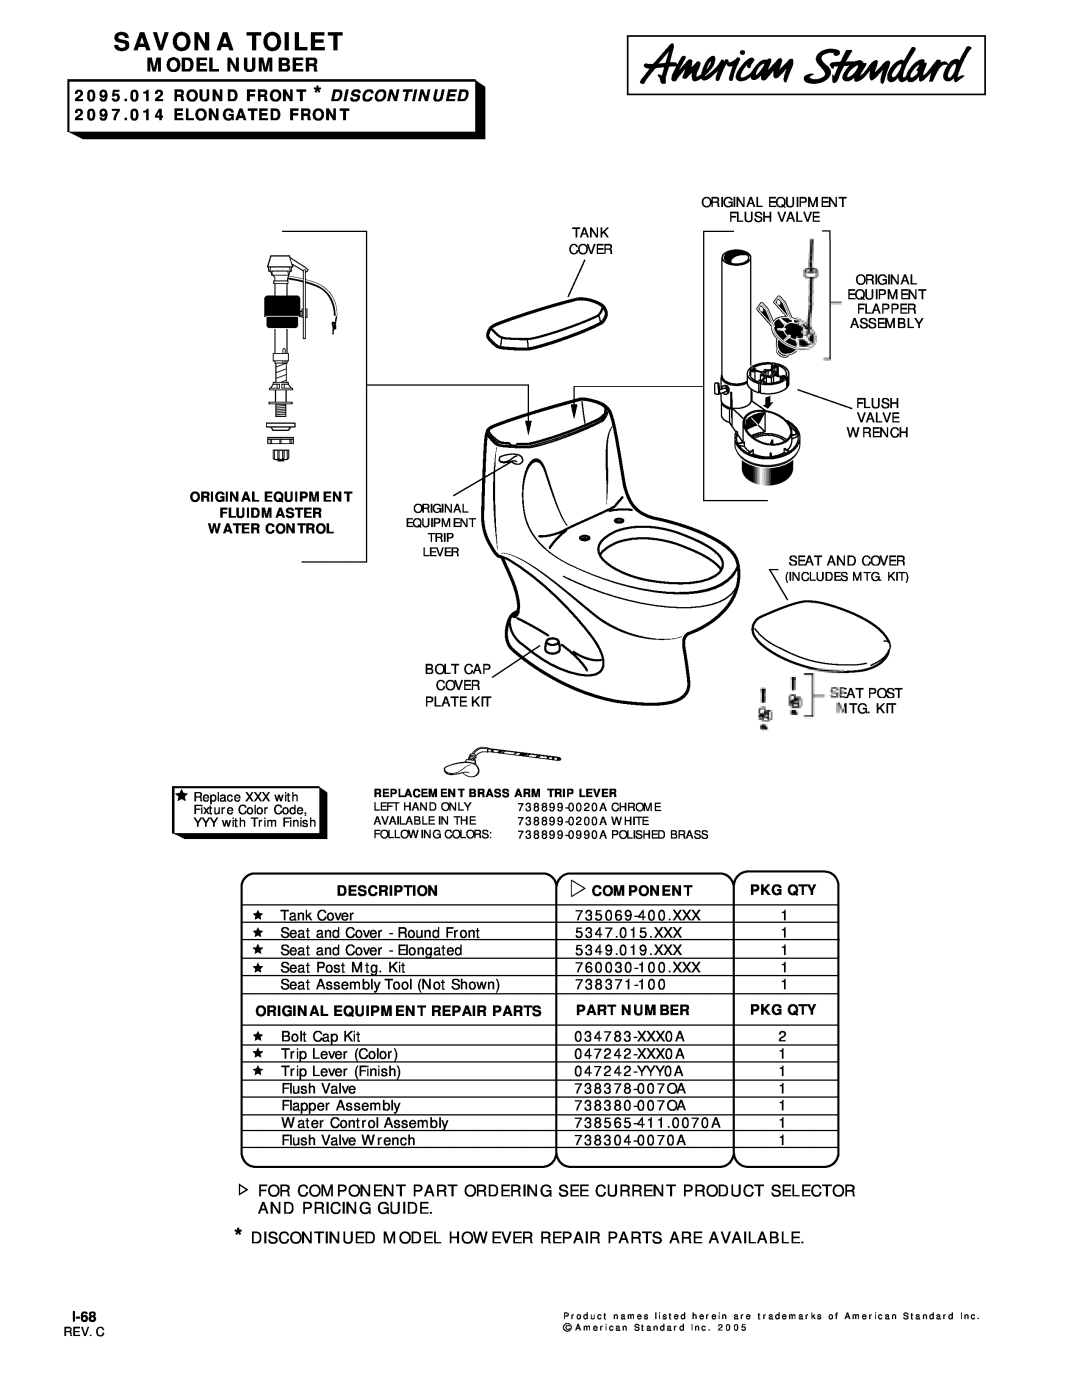 American Standard 2097.014, 2095.012 manual Savona Toilet, Model Number, Round Front *Discontinued, Elongated Front 